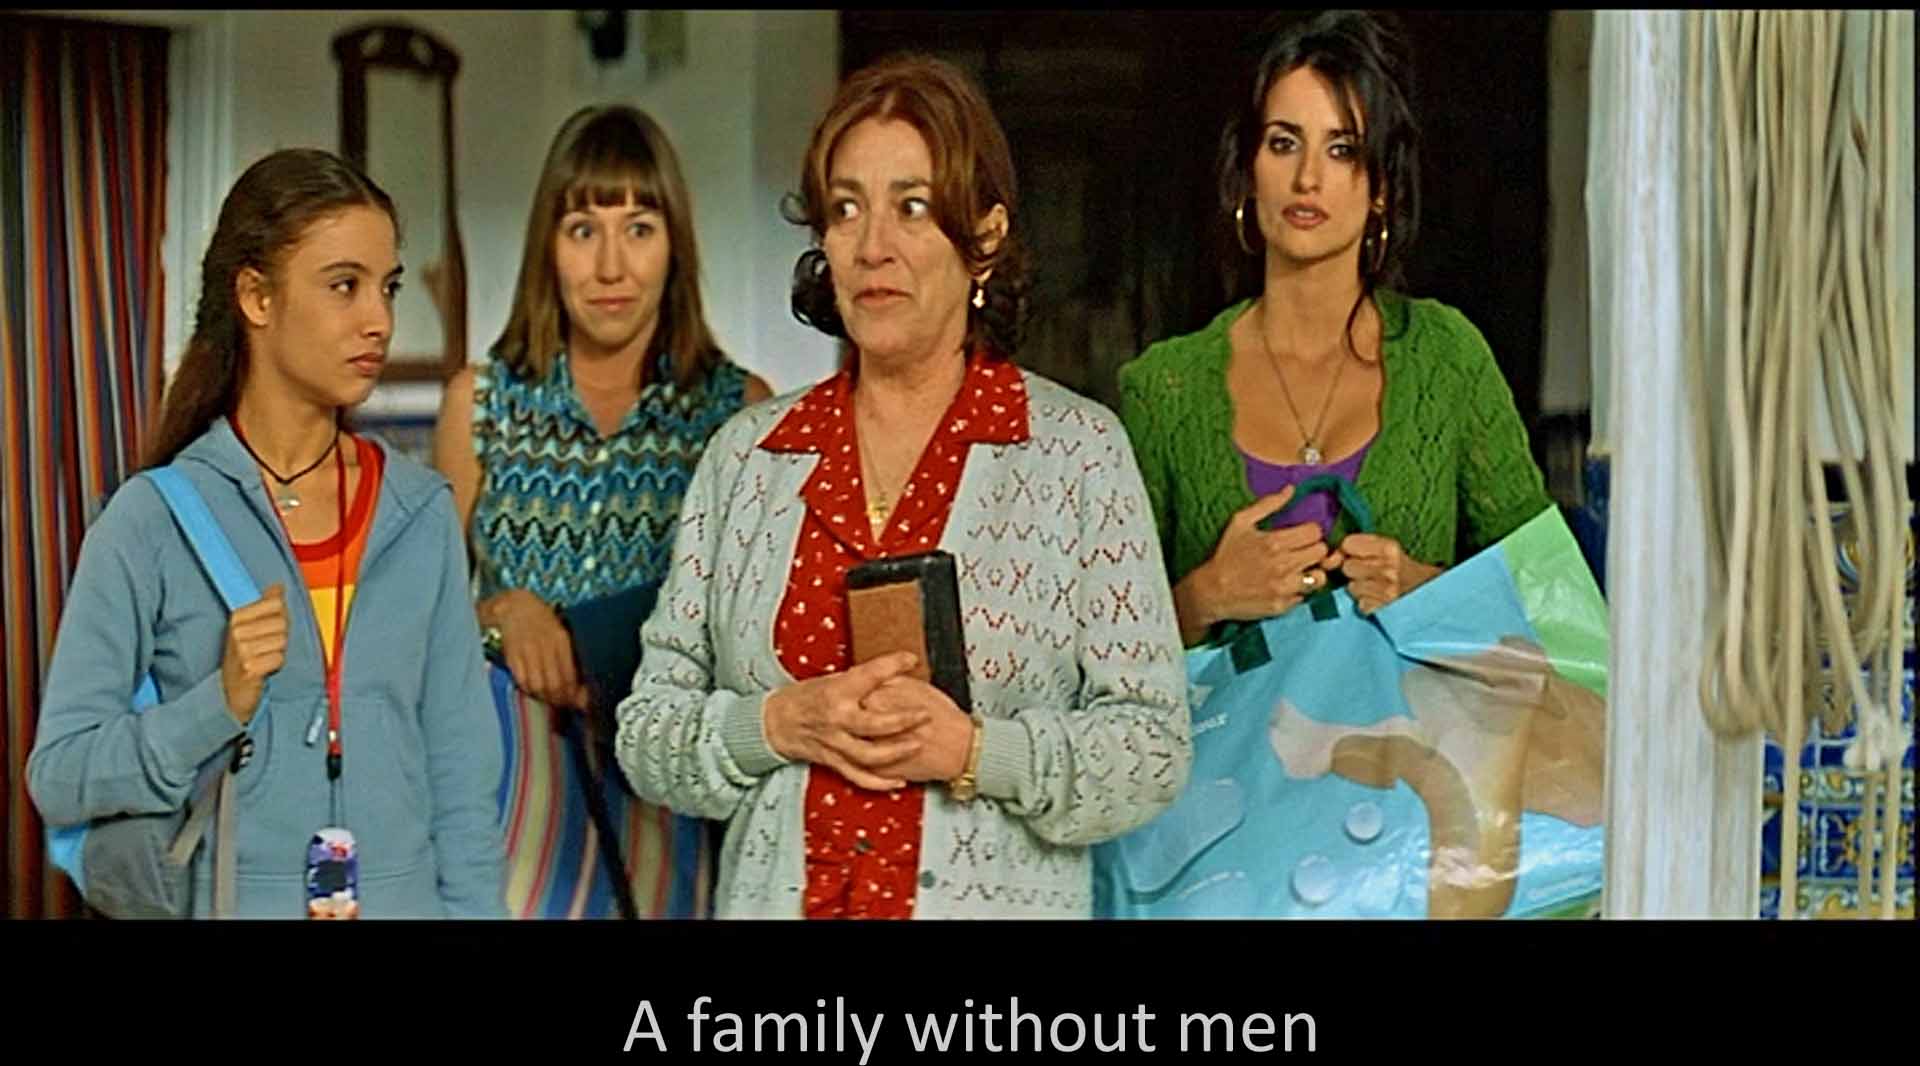 A family without men